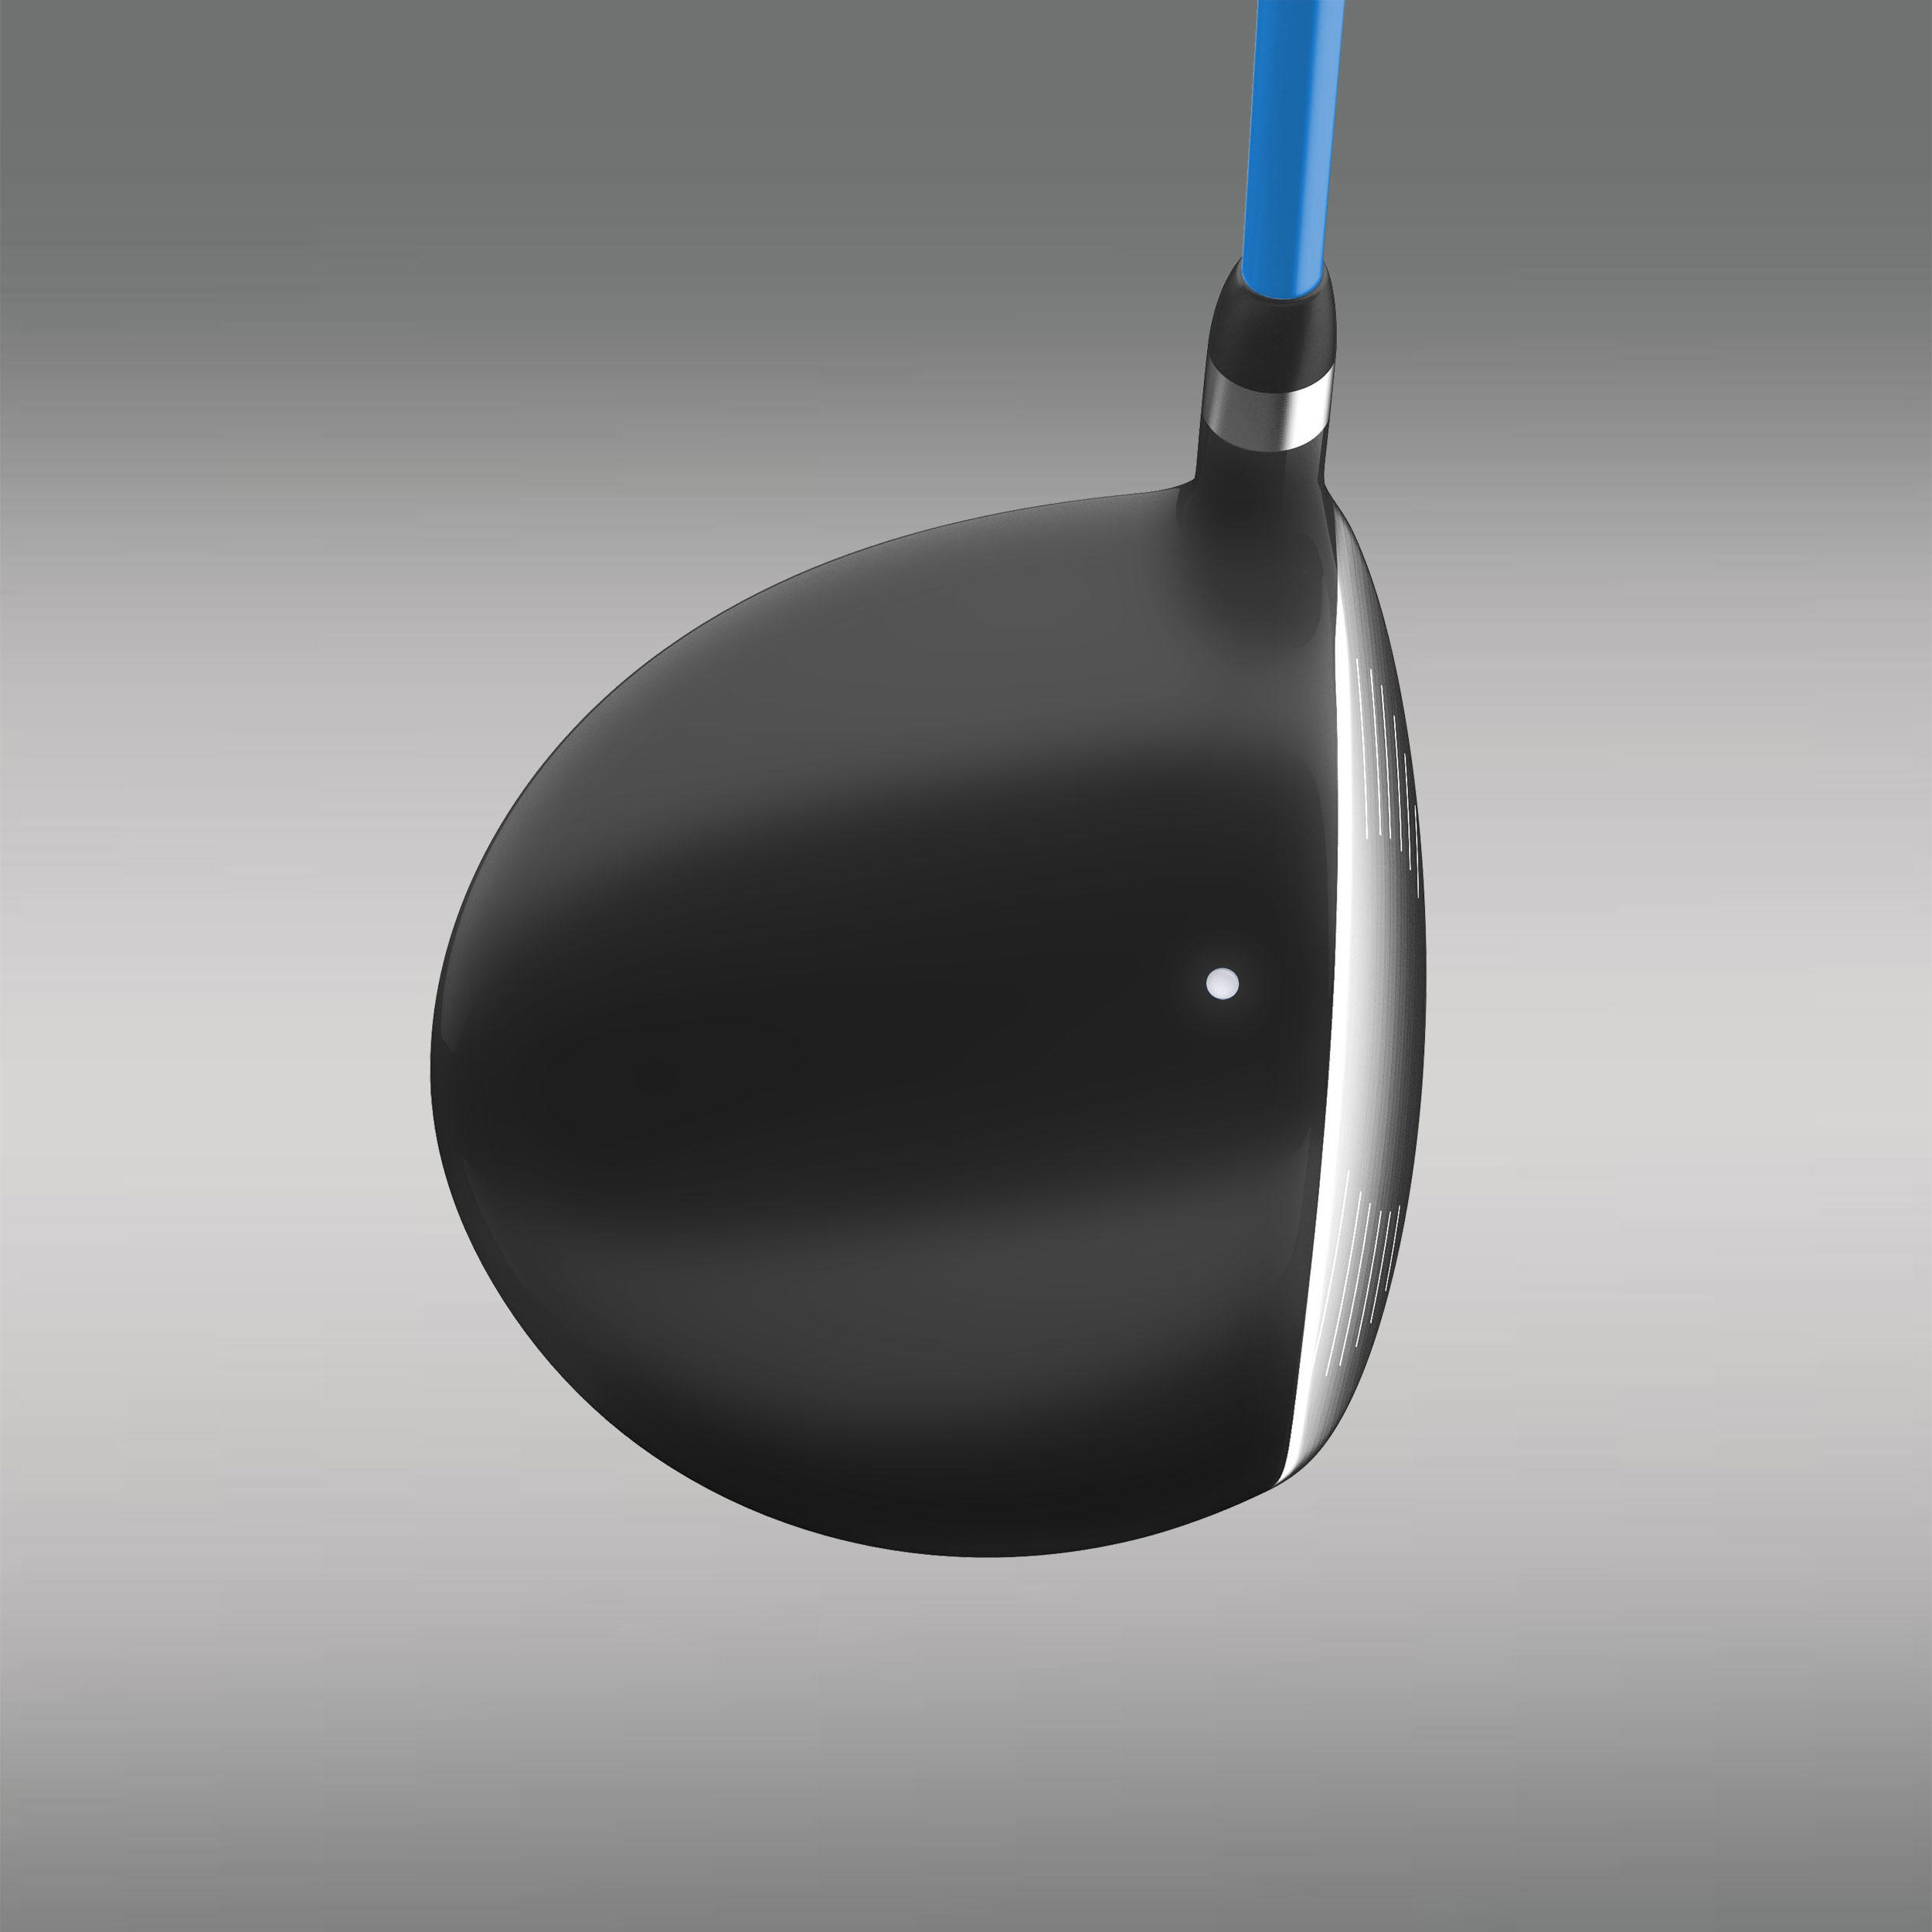 KIDS' GOLF DRIVER 11-13 YEARS RIGHT HANDED - INESIS 3/7